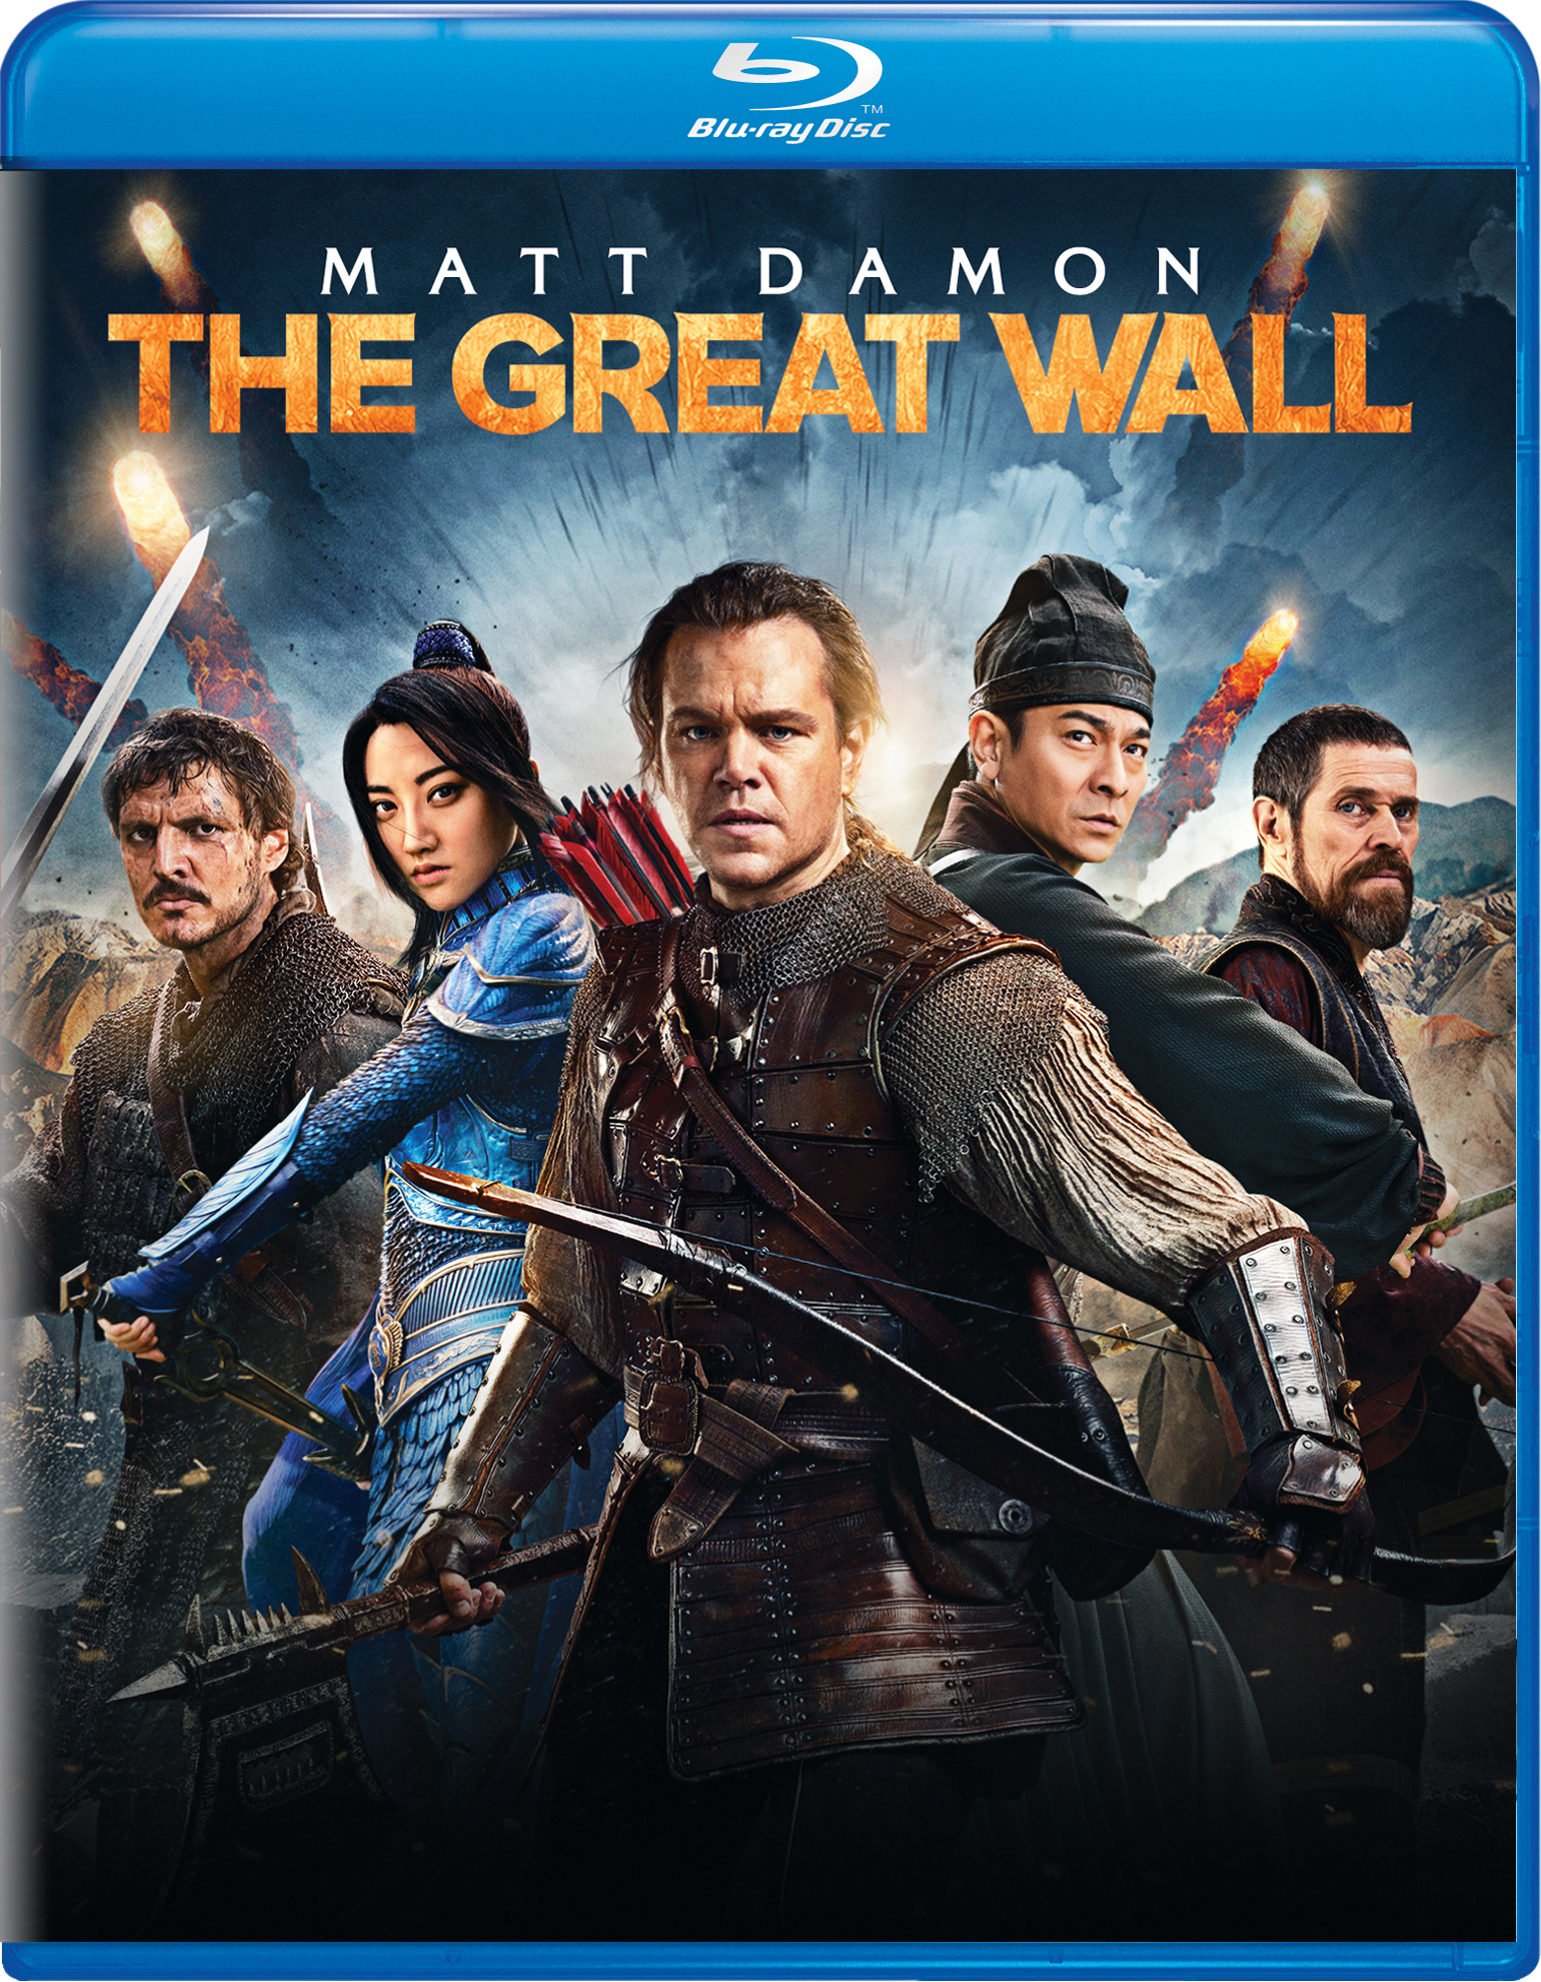 The Great Wall [Blu-ray] [2016]